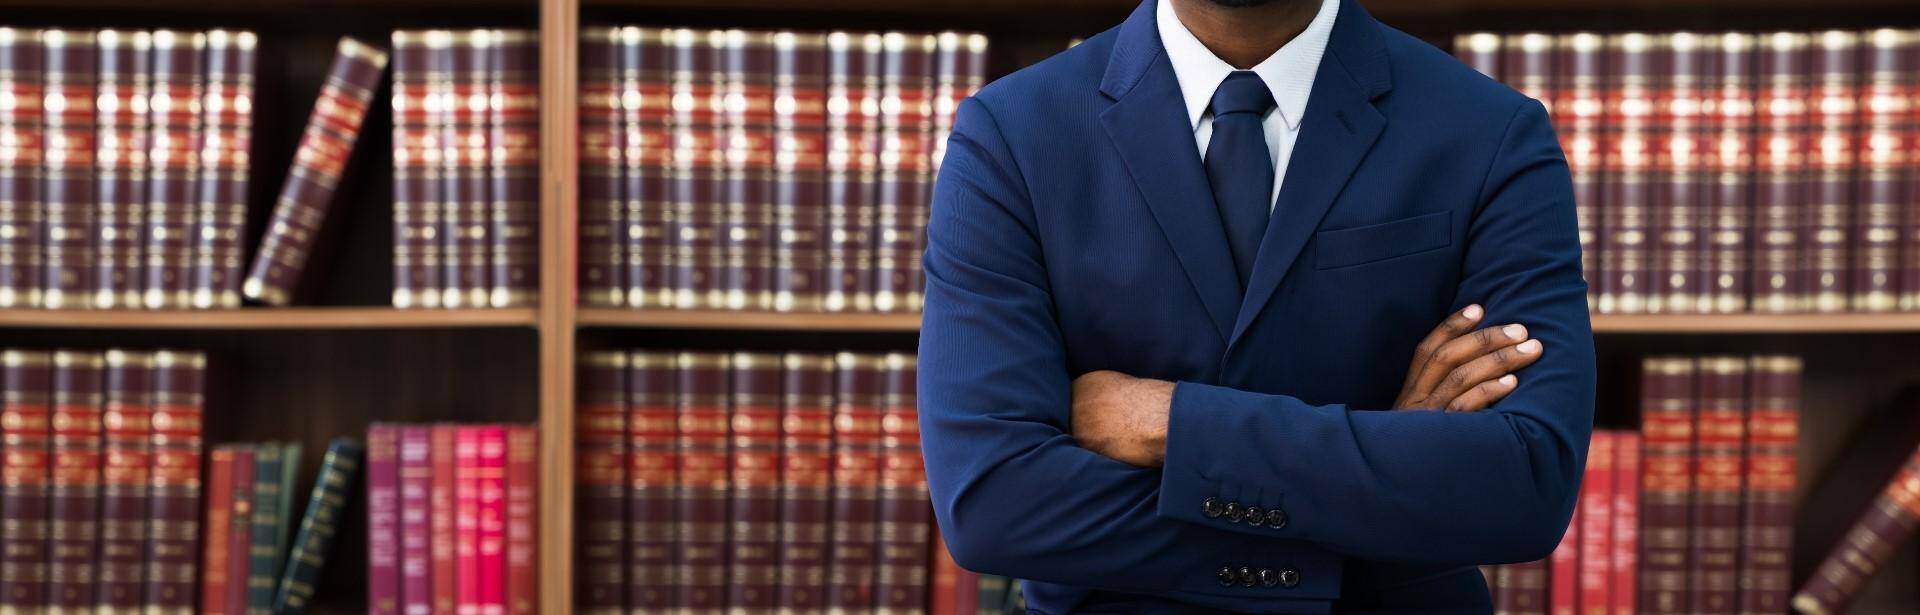 A black lawyer standing in front of a bookshelf of law book in Atlanta, Georgia